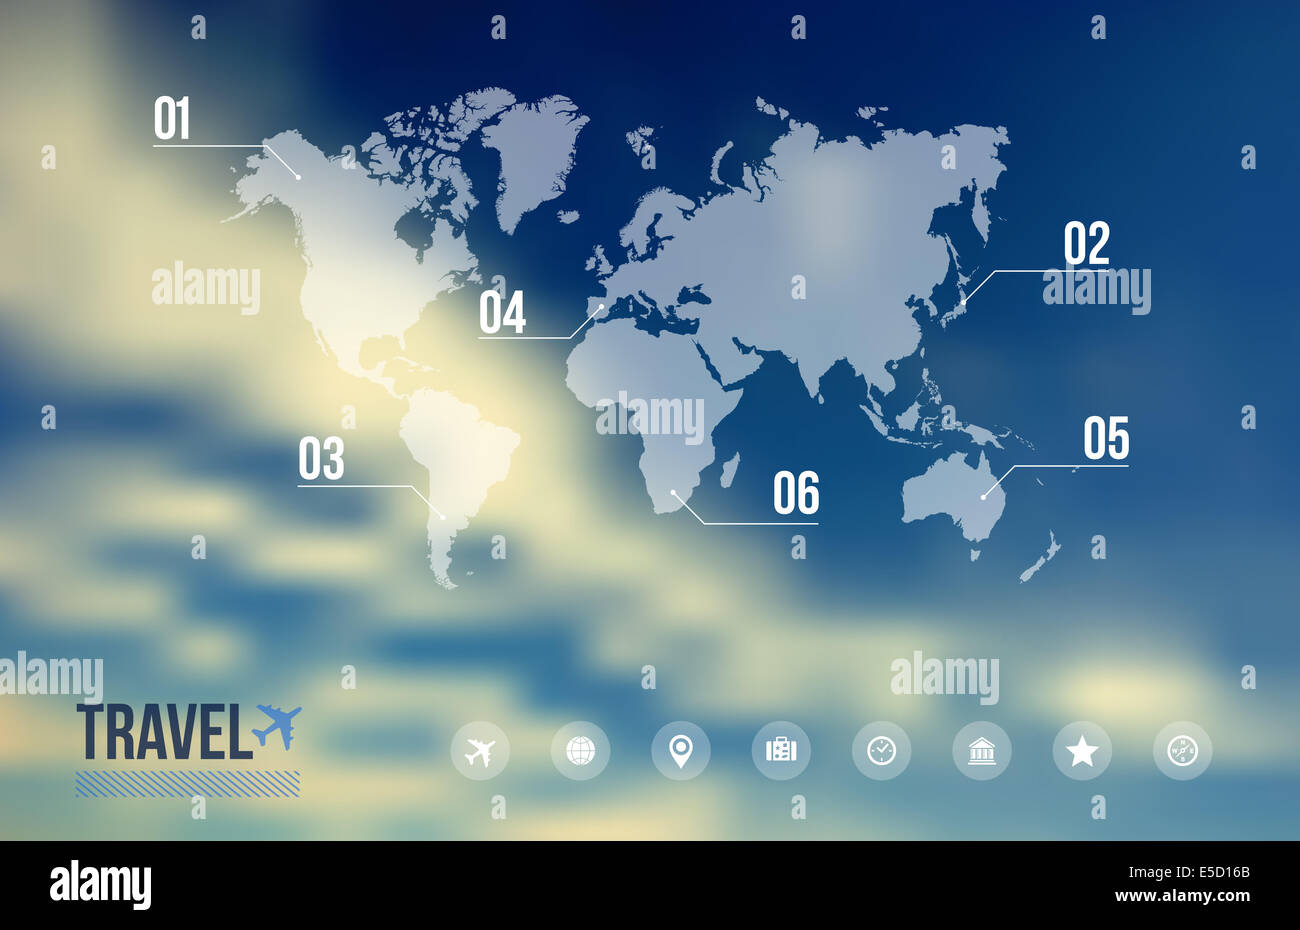 Travel by plane infographic, world map and icons vacation over sky blue blurred effect background. EPS10 vector file with transp Stock Photo